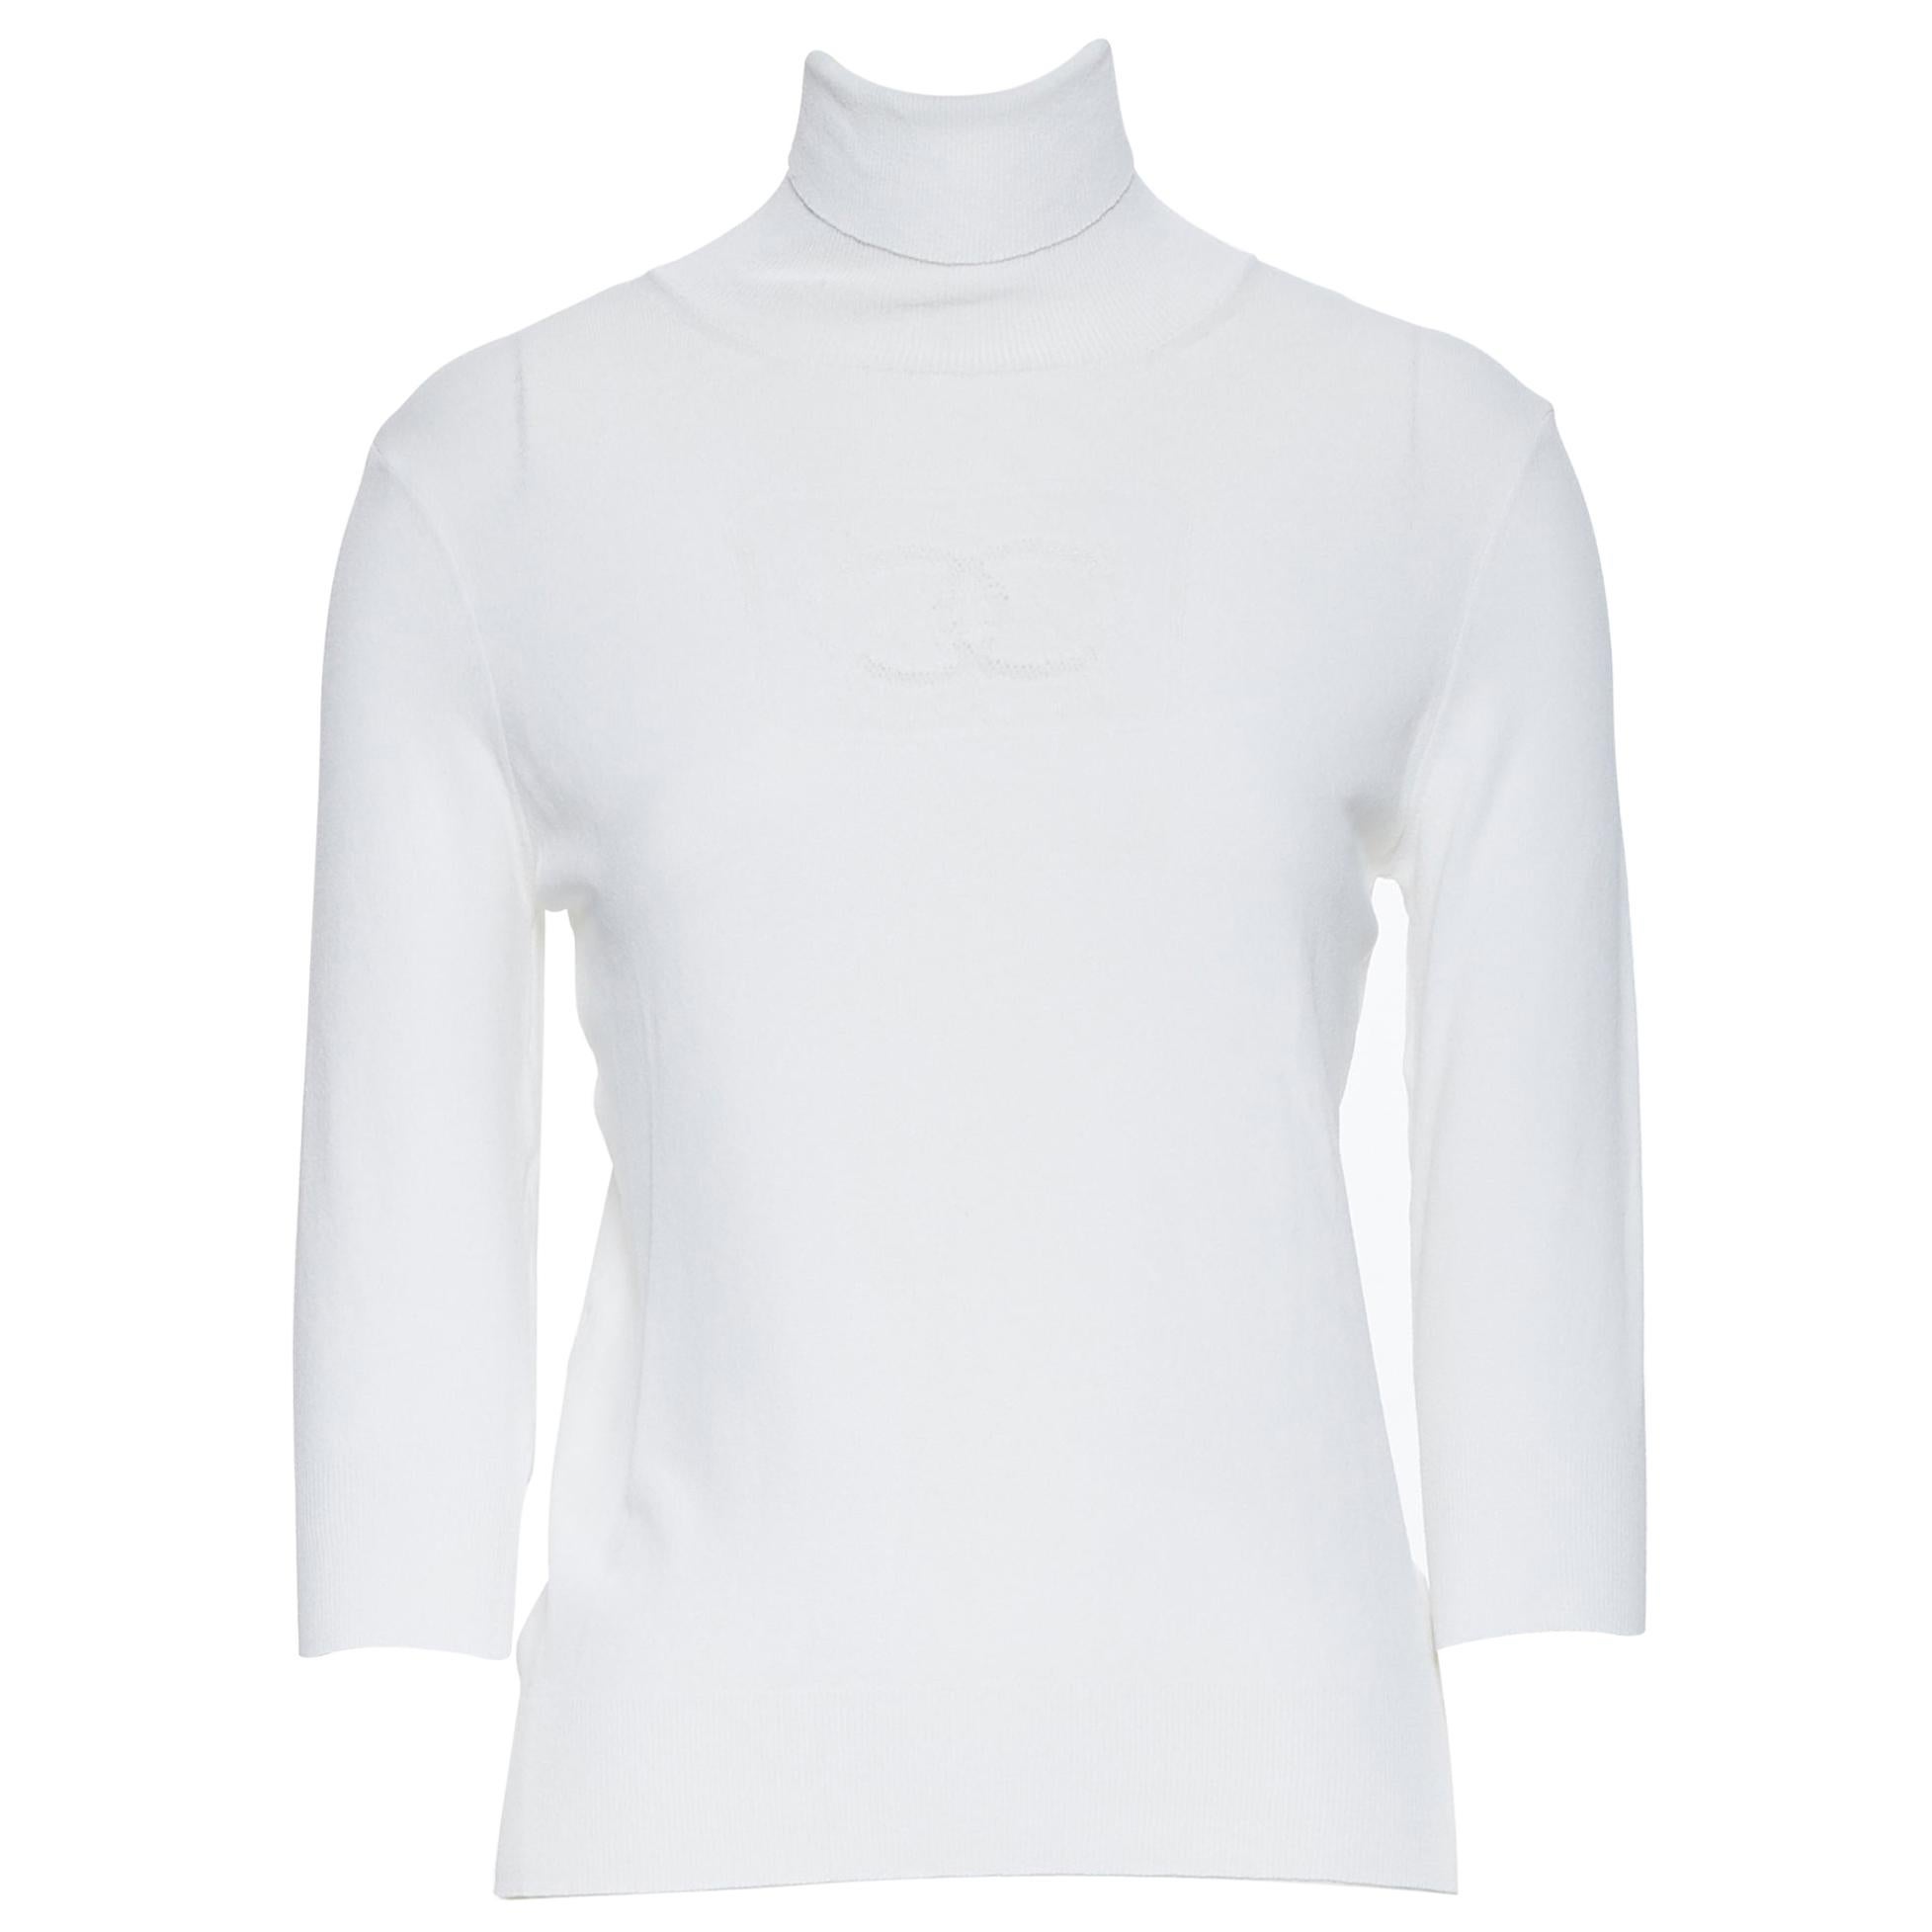 Black Friday Chanel T-Shirts − up to −20%